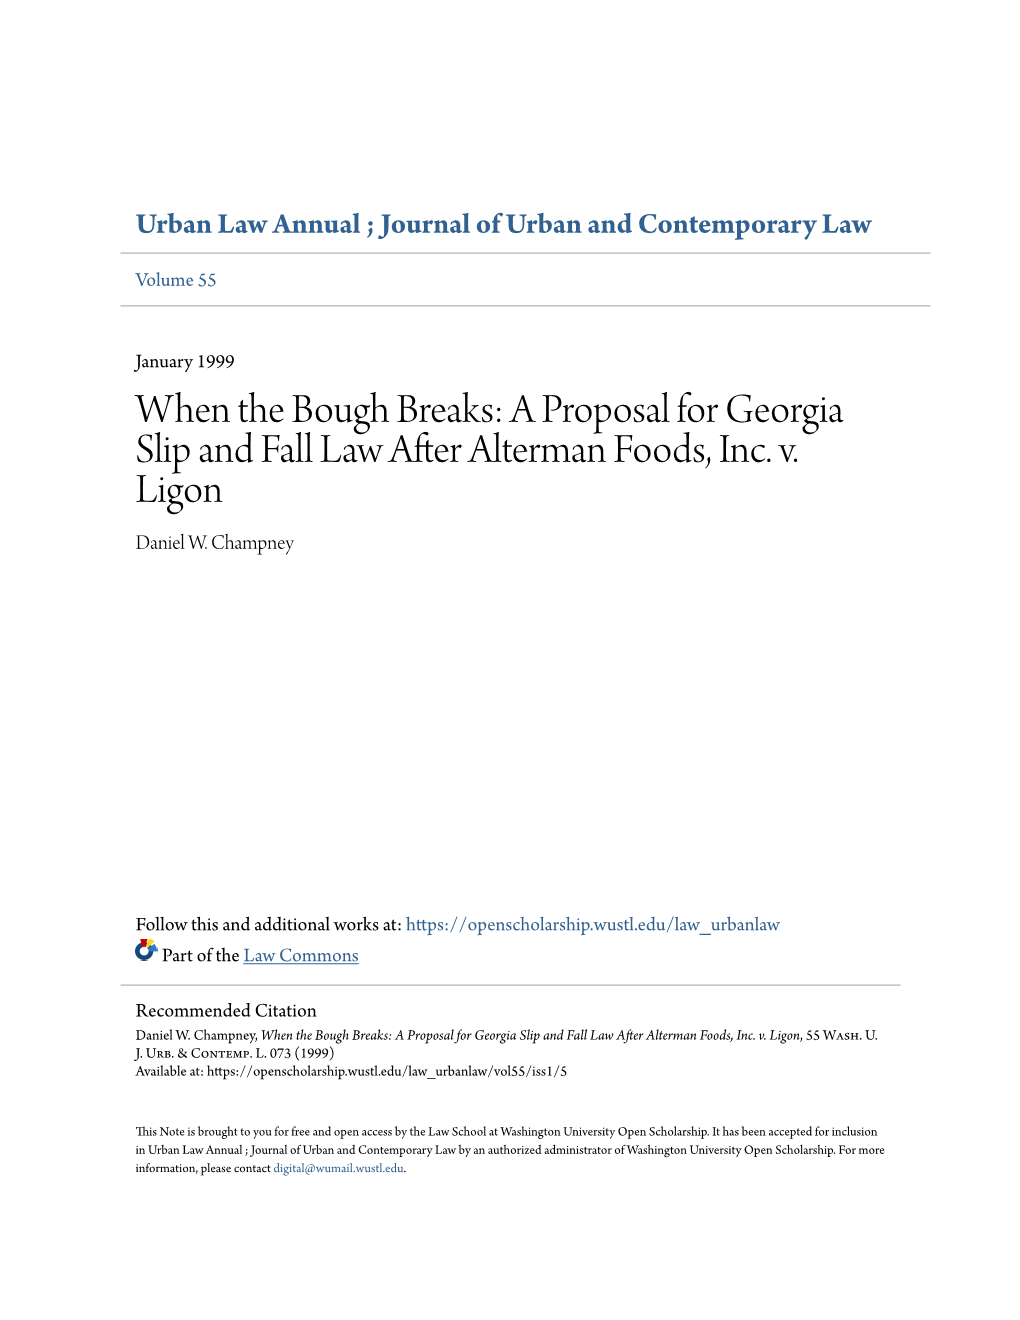 When the Bough Breaks: a Proposal for Georgia Slip and Fall Law After Alterman Foods, Inc. V. Ligon Daniel W